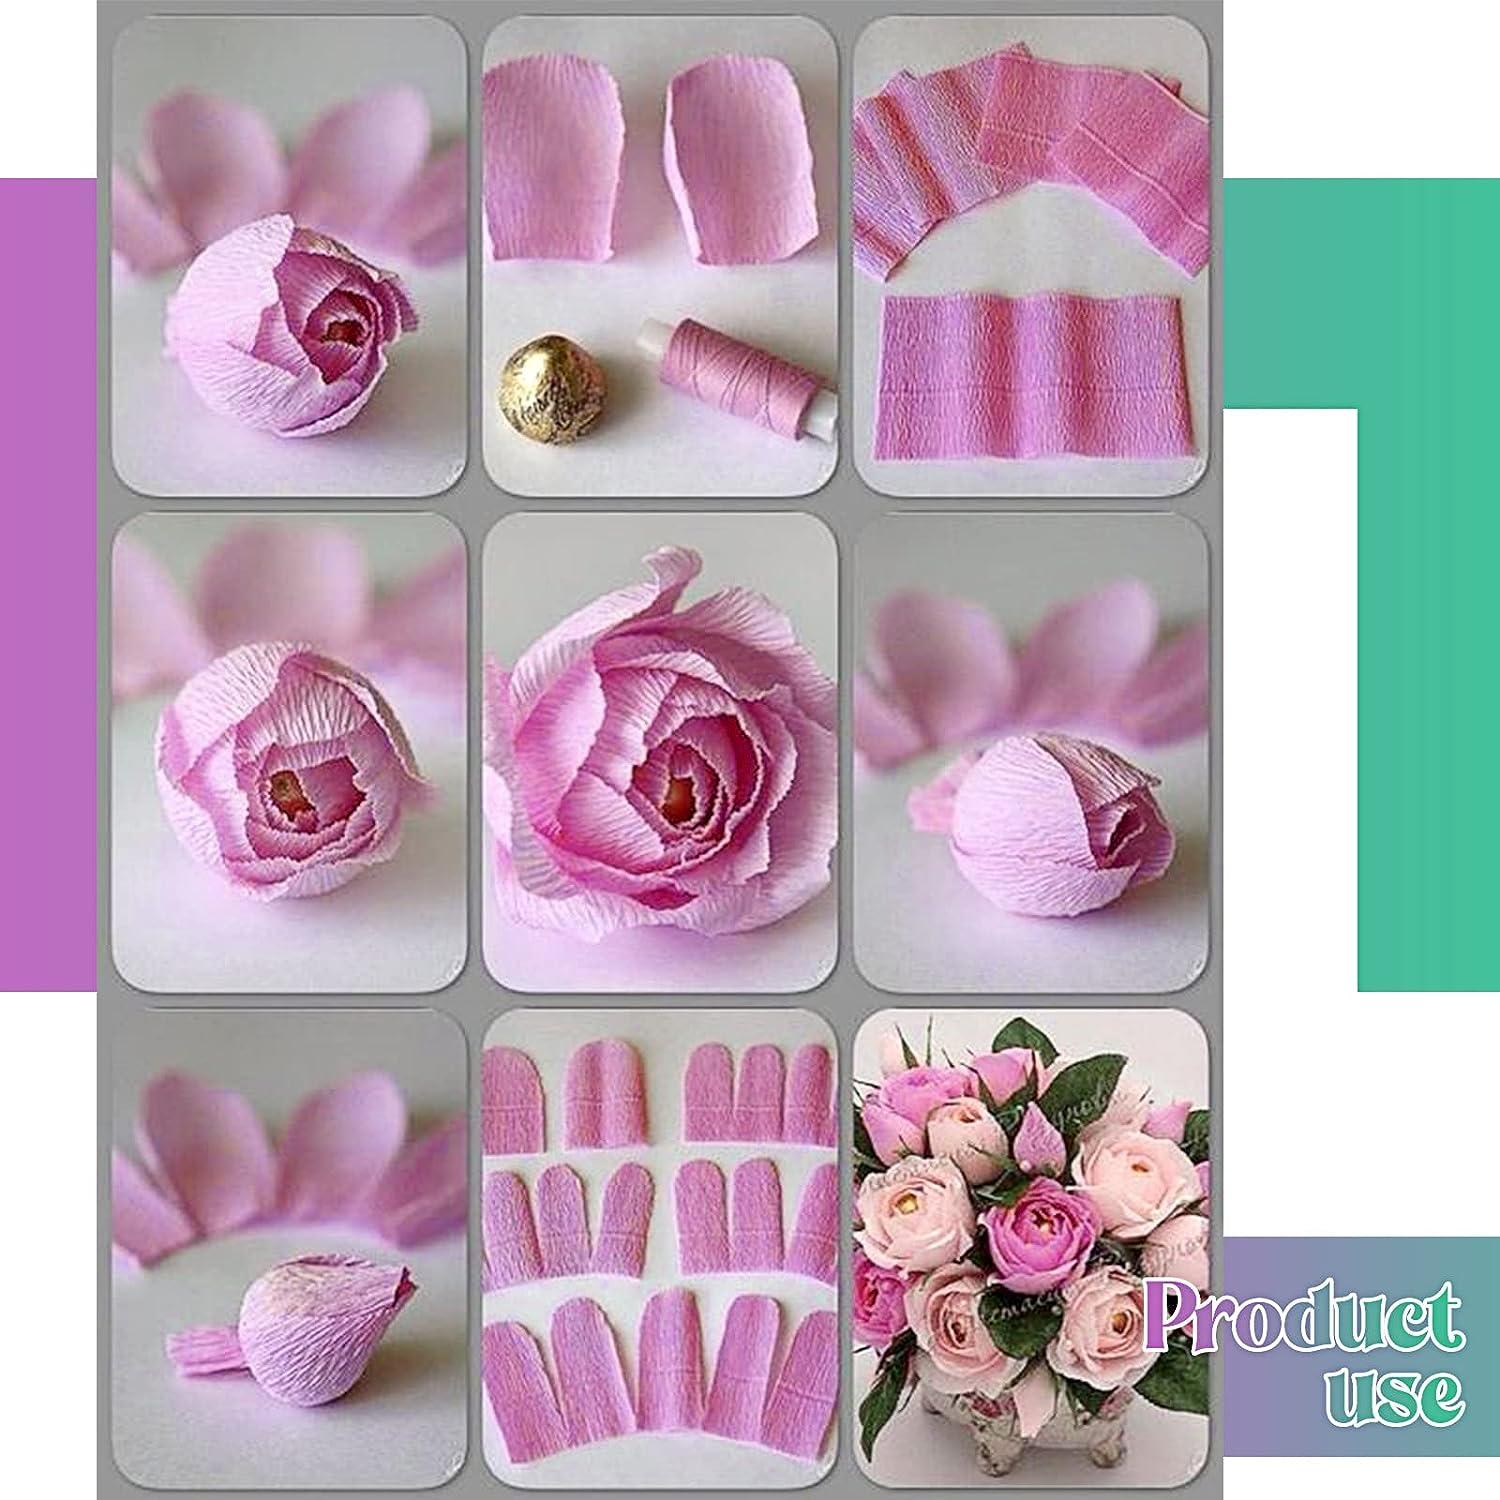  Crepe Paper Flowers, MicButty 42 Pieces Paper Flower Kit Crepe  Paper Roll with Floral Tape, Floral Iron Wire Paper Flowers for Crafts  Wedding Festival Party Supplies DIY : Arts, Crafts 